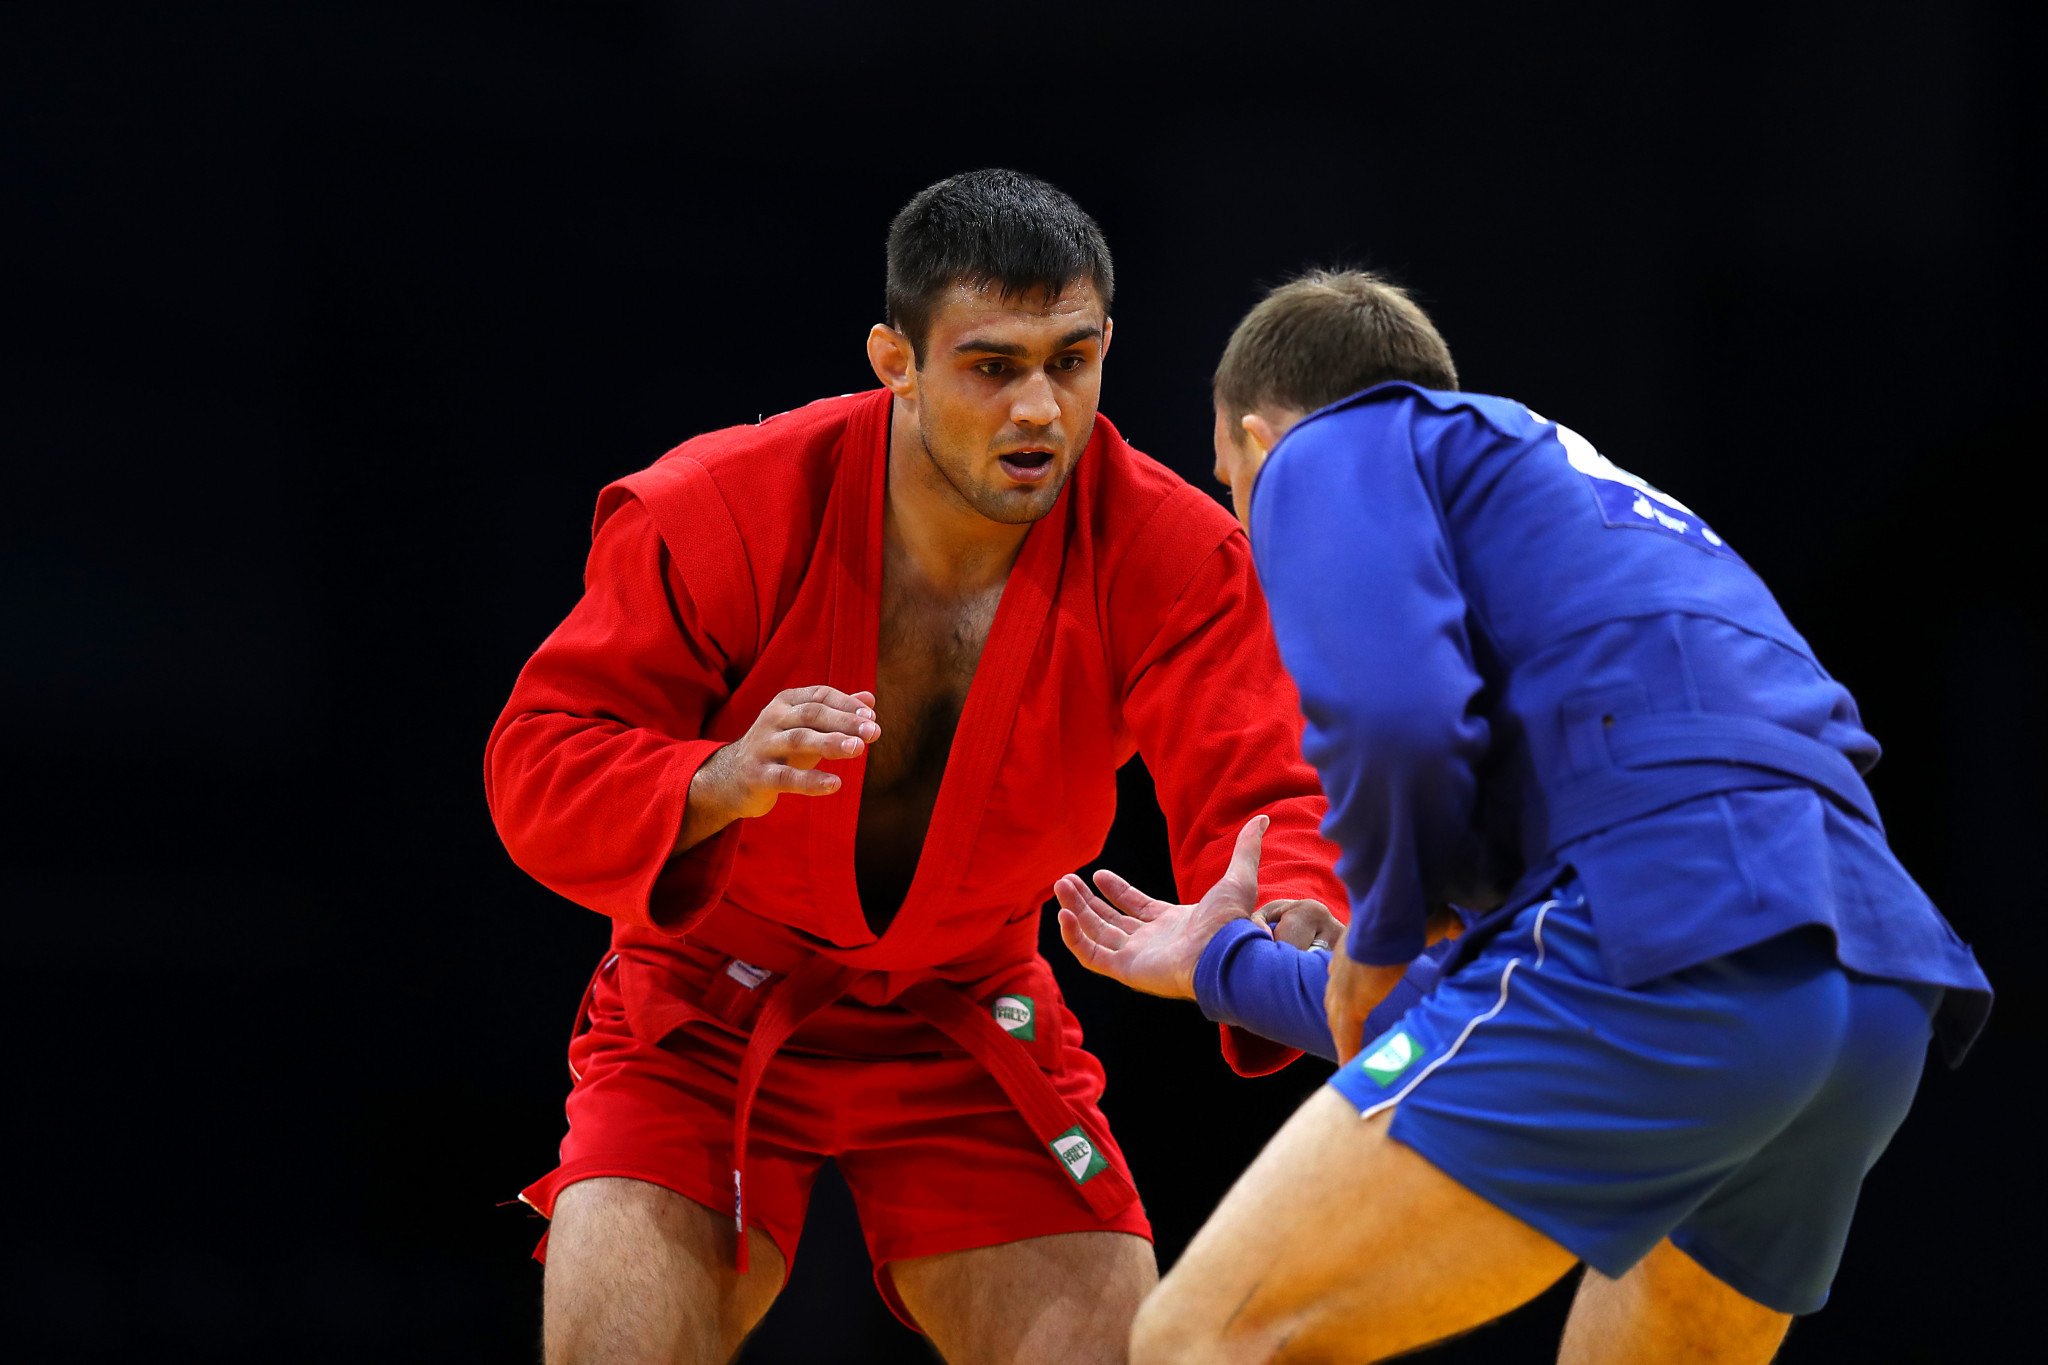 Sambo was granted provisional IOC recognition in 2018 ©Getty Images